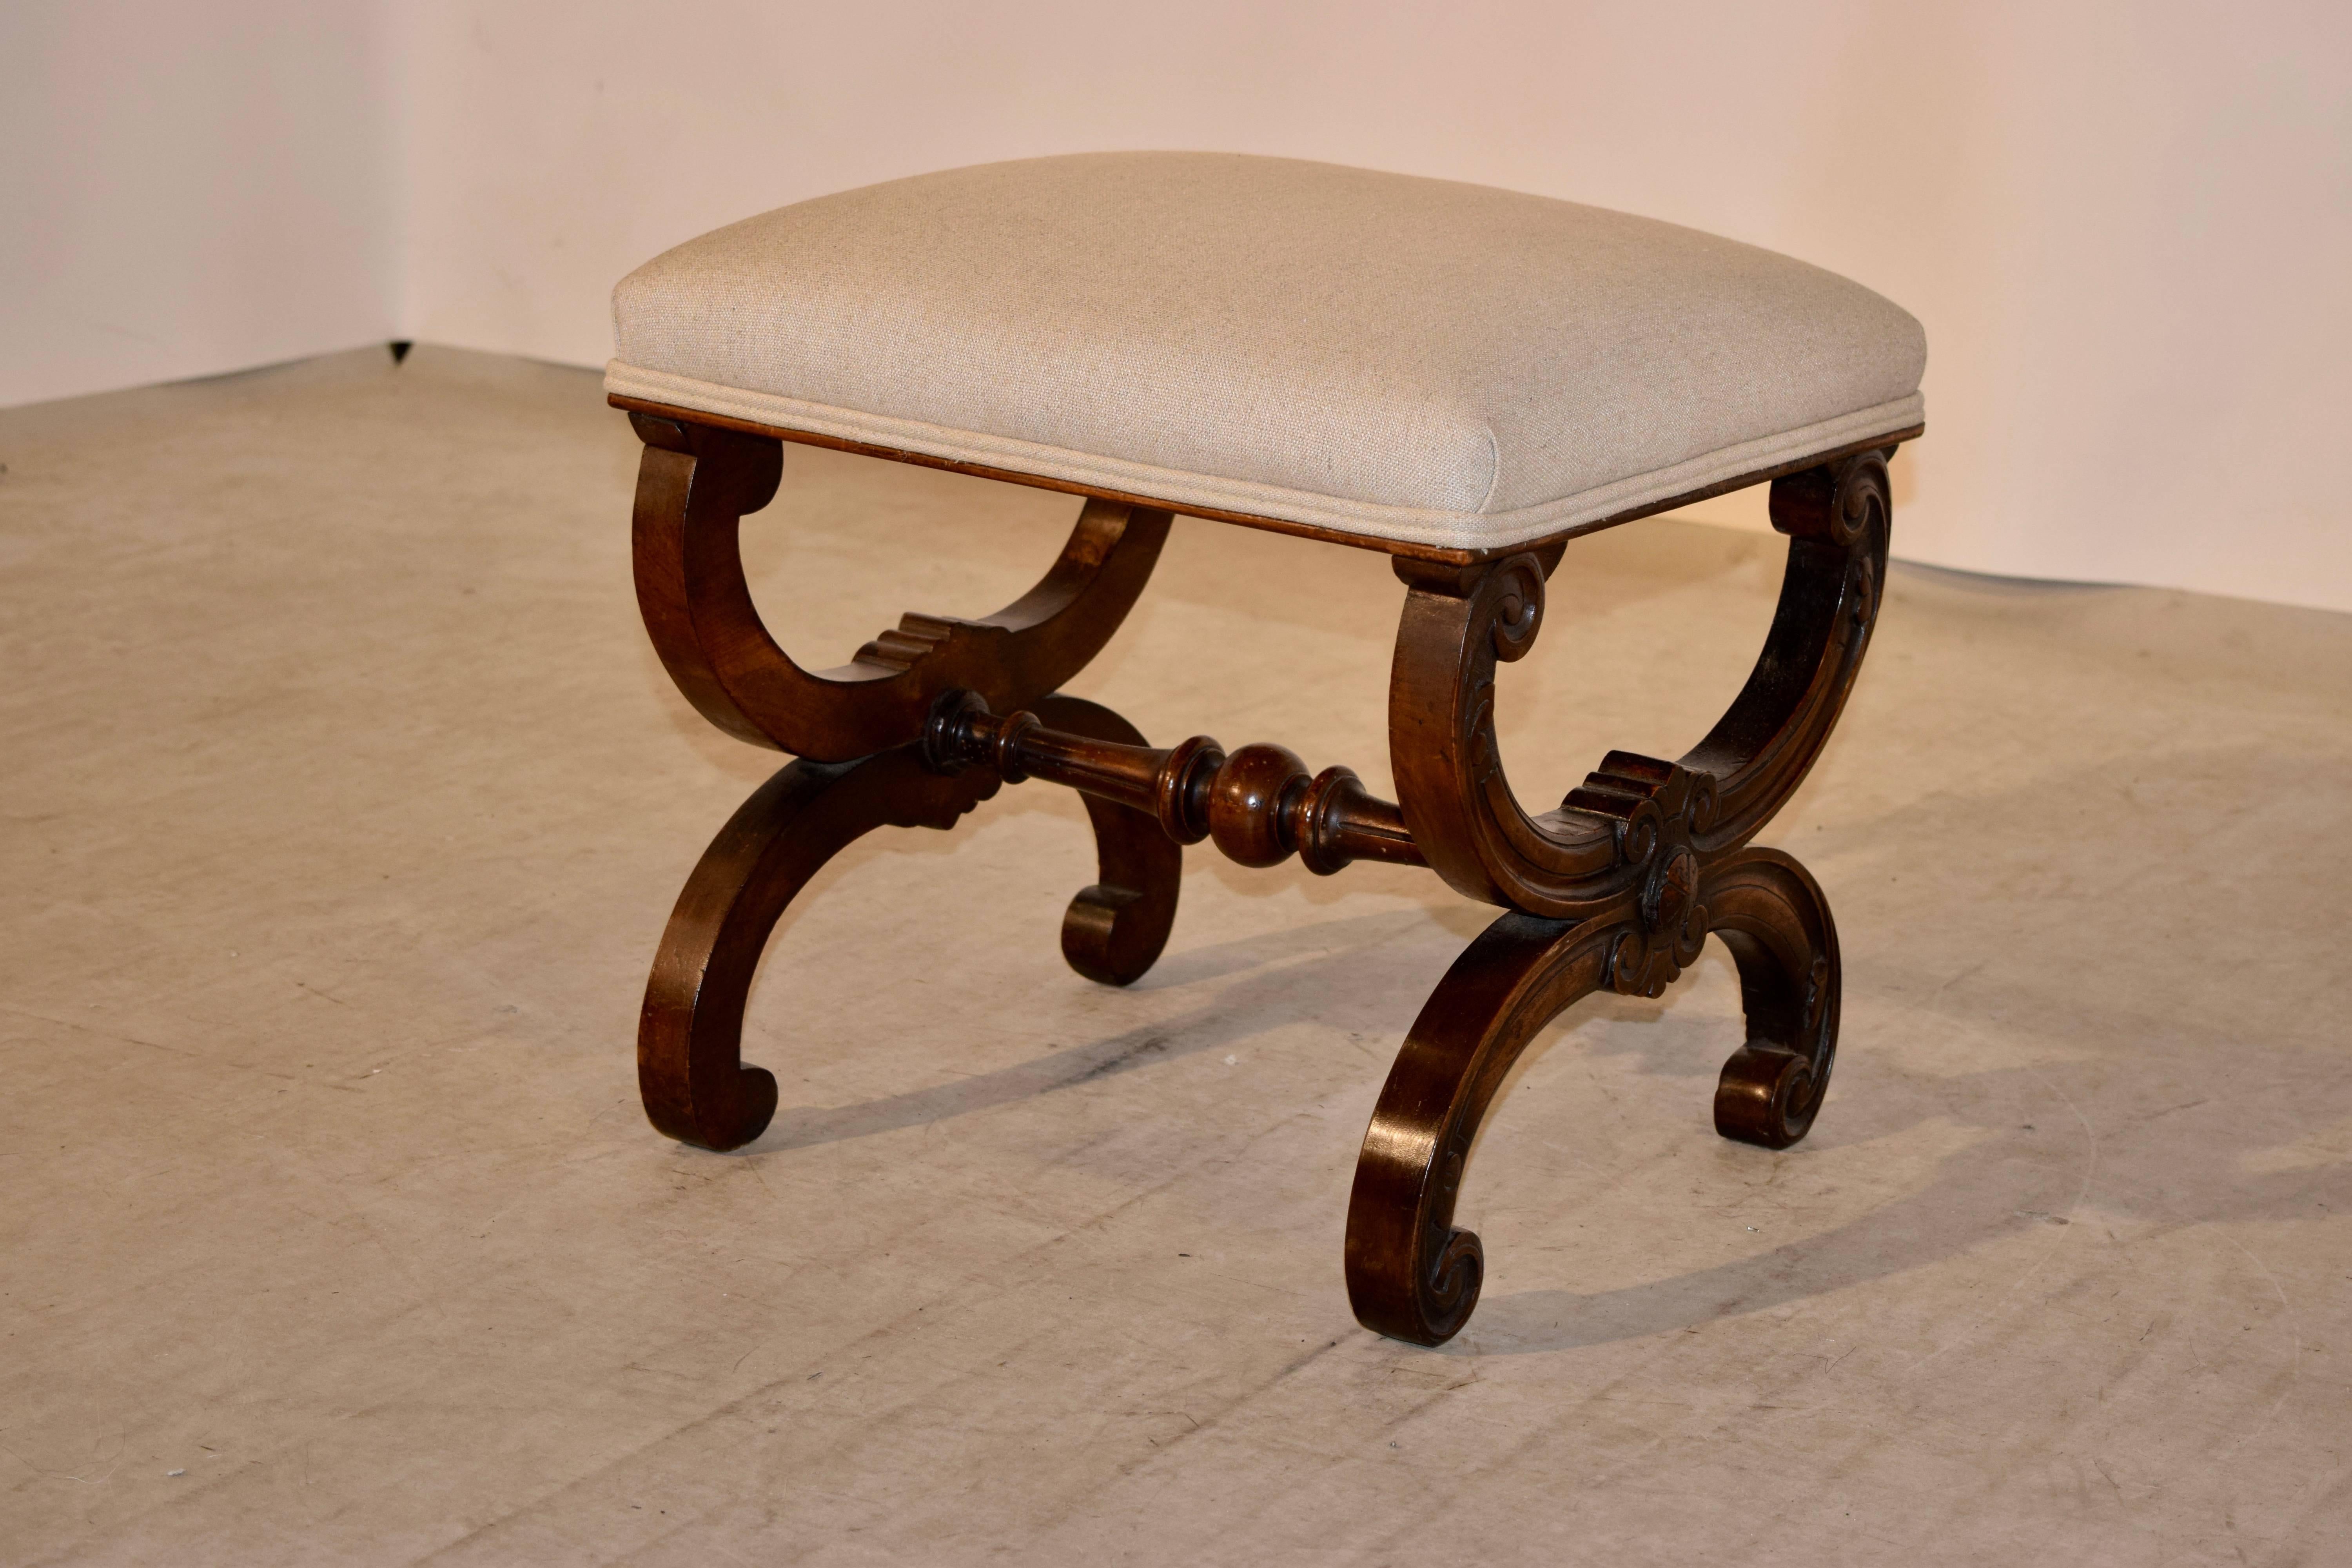 19th century French stool made from mahogany with a newly upholstered top in linen which has a double welt trim around the seat. The legs are fancy X-stretchers, connected by a hand turned stretcher.